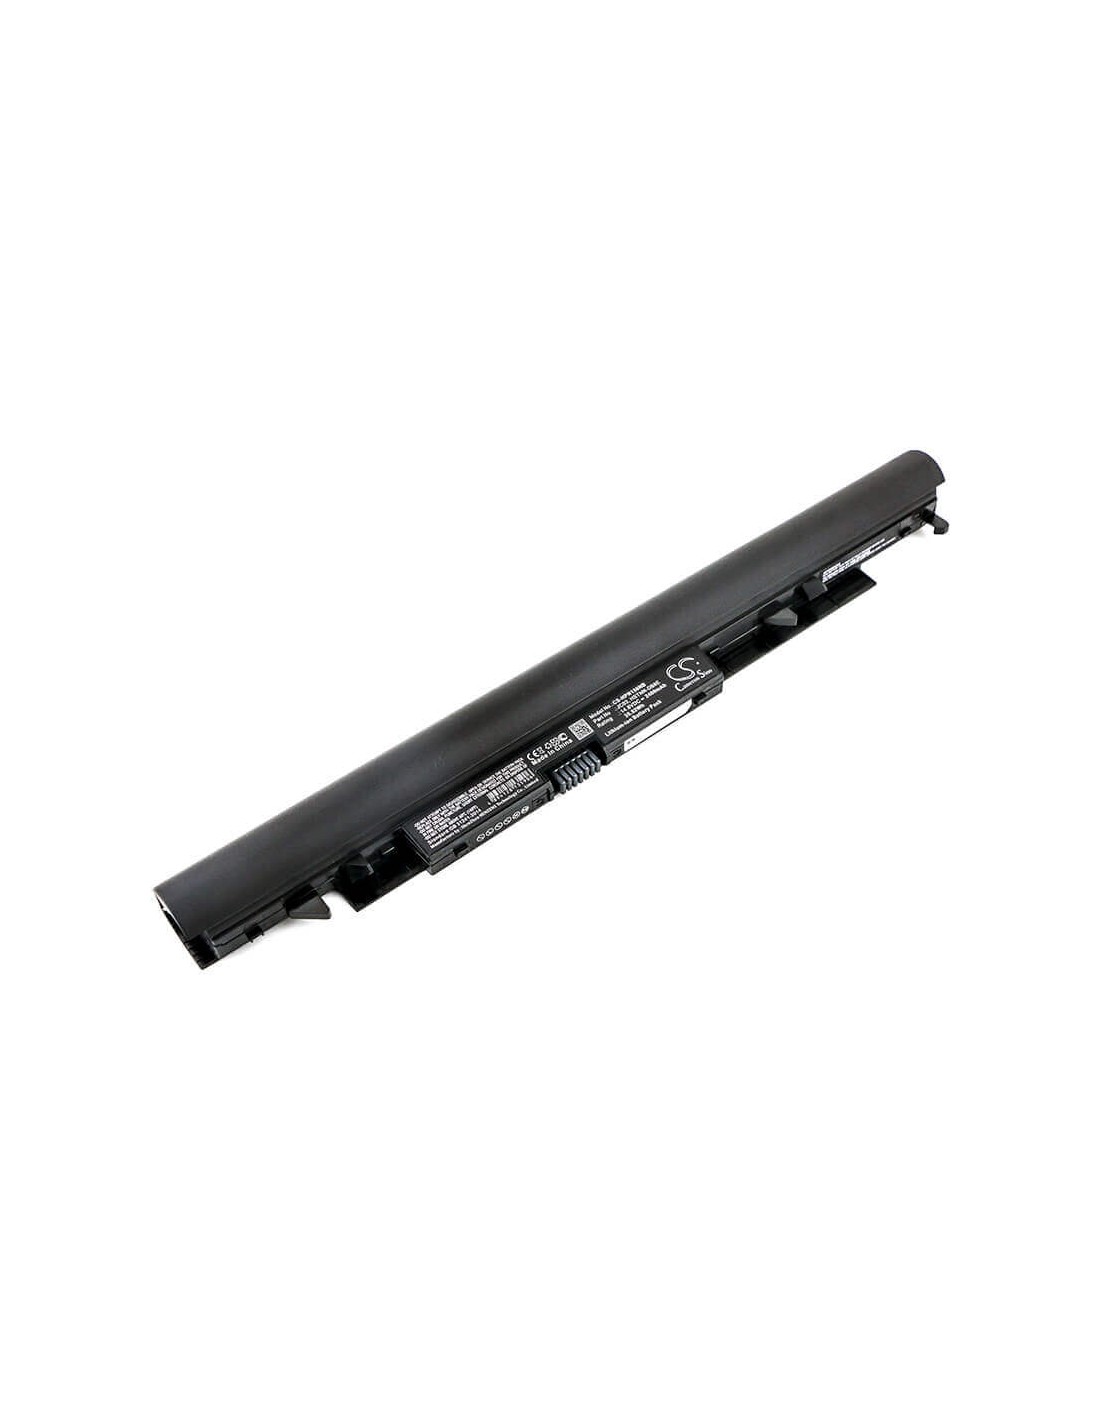 Battery for Hp Notebook 15-bs, Notebook 15-bw, Notebook 15 Bs-009ne 14.8V, 2400mAh - 35.52Wh